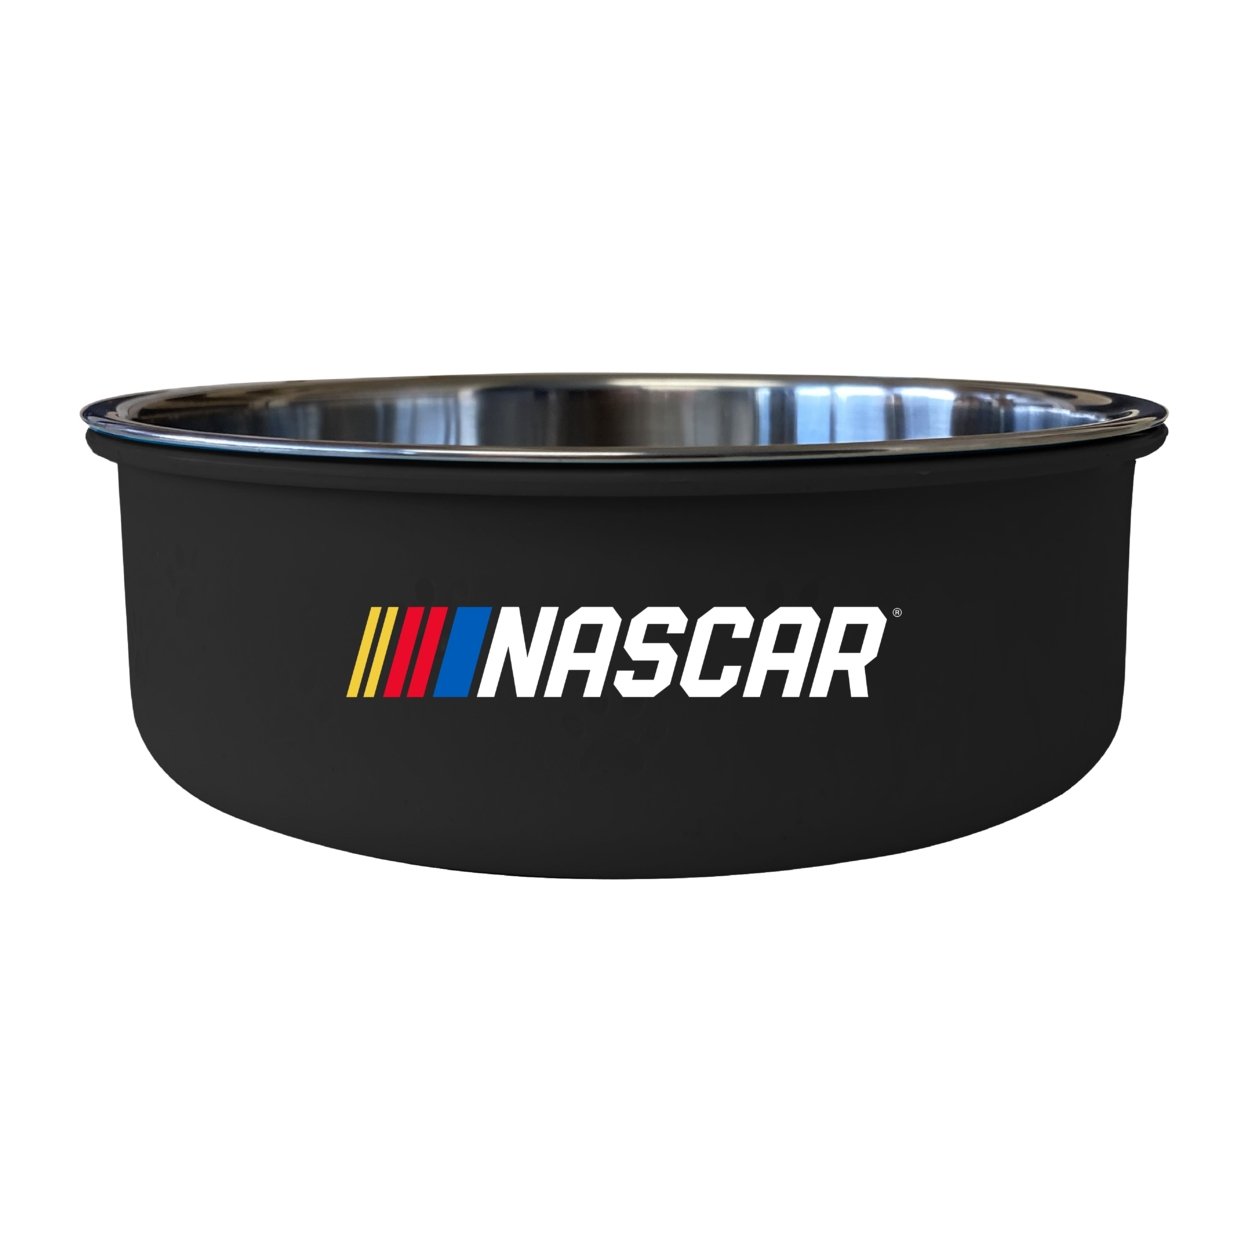 NASCAR Officially Licensed 5x2.25 Pet Bowl